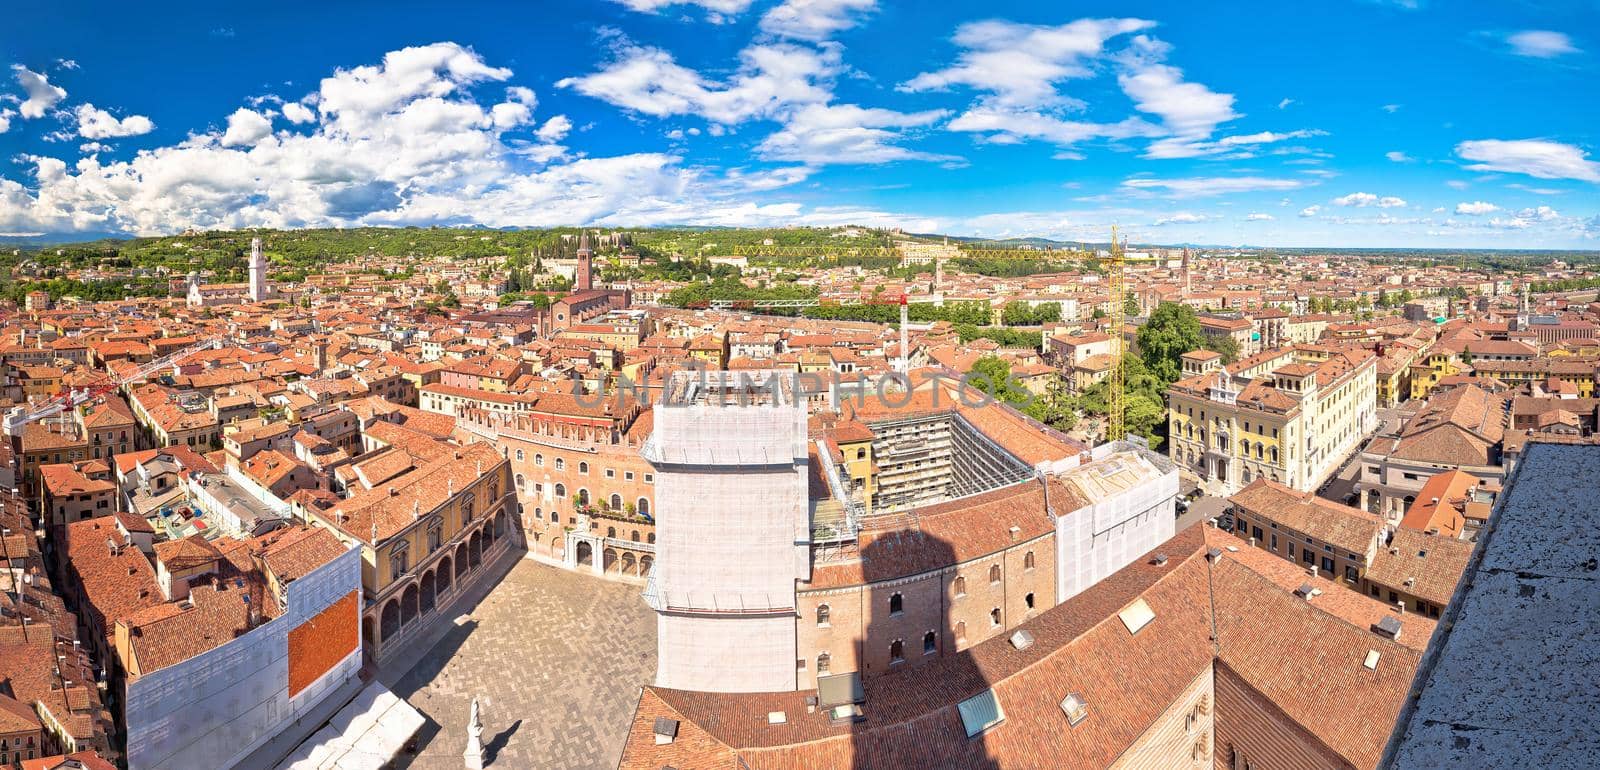 City of Verona aerial panoramic view from Lamberti tower, rooftops of old town, Veneto region of Italy
